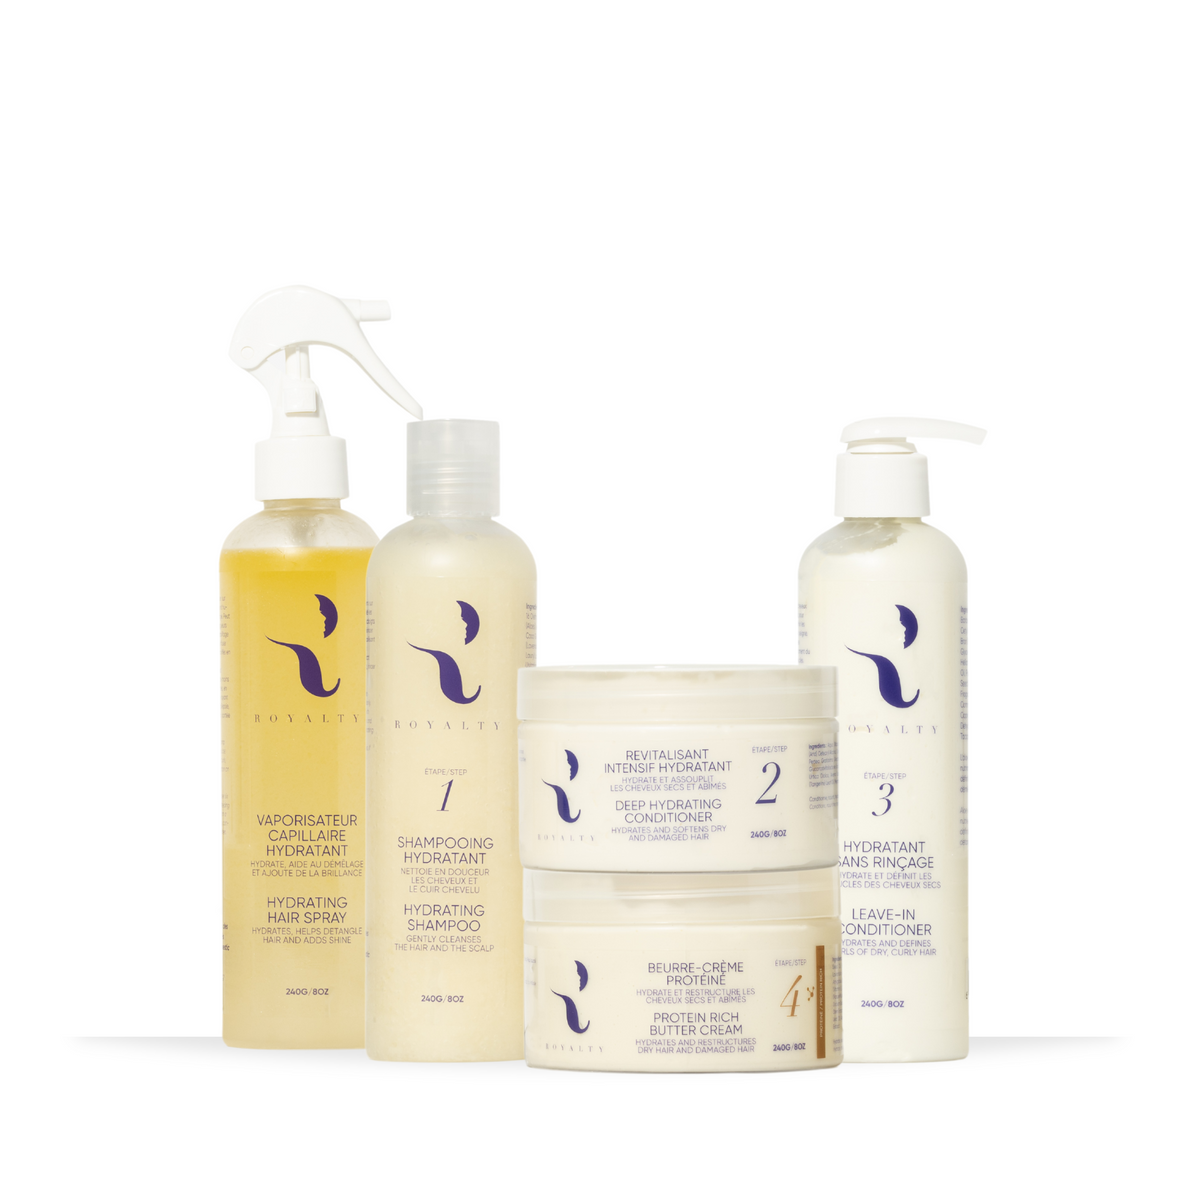 Moisturizing and Protein Care Discovery Set (Intensive Care)